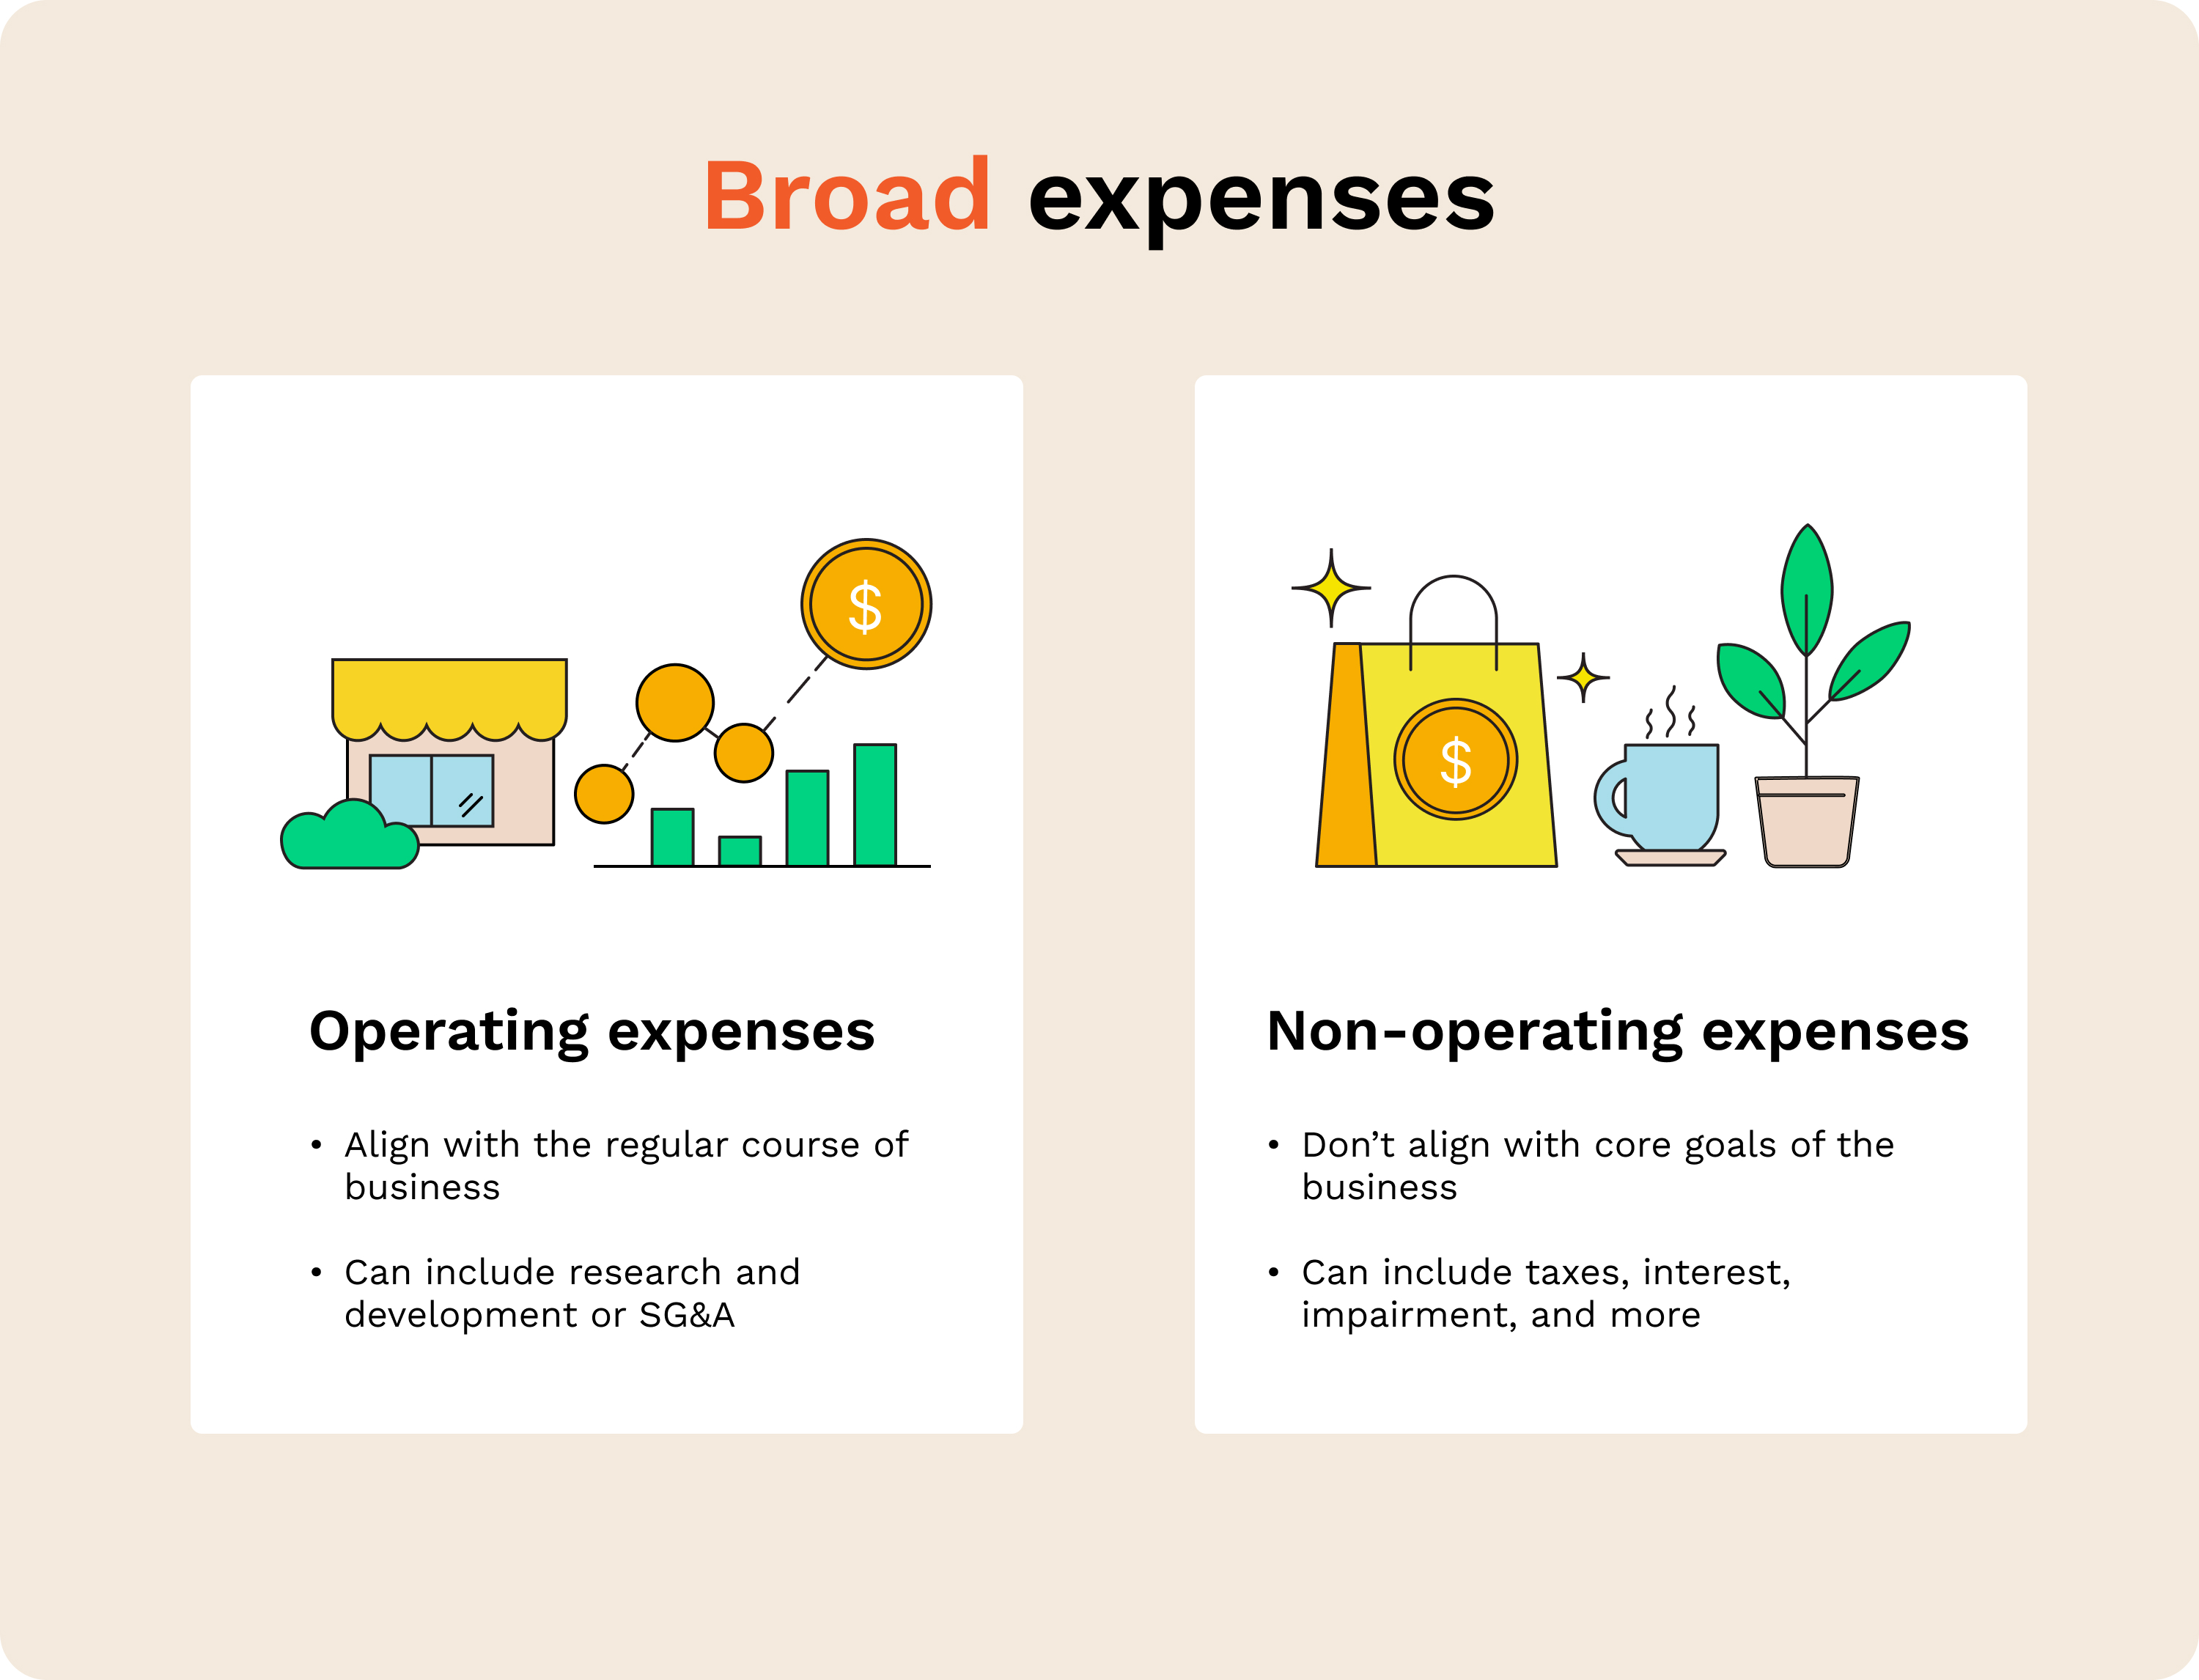 An explanation of broad expenses